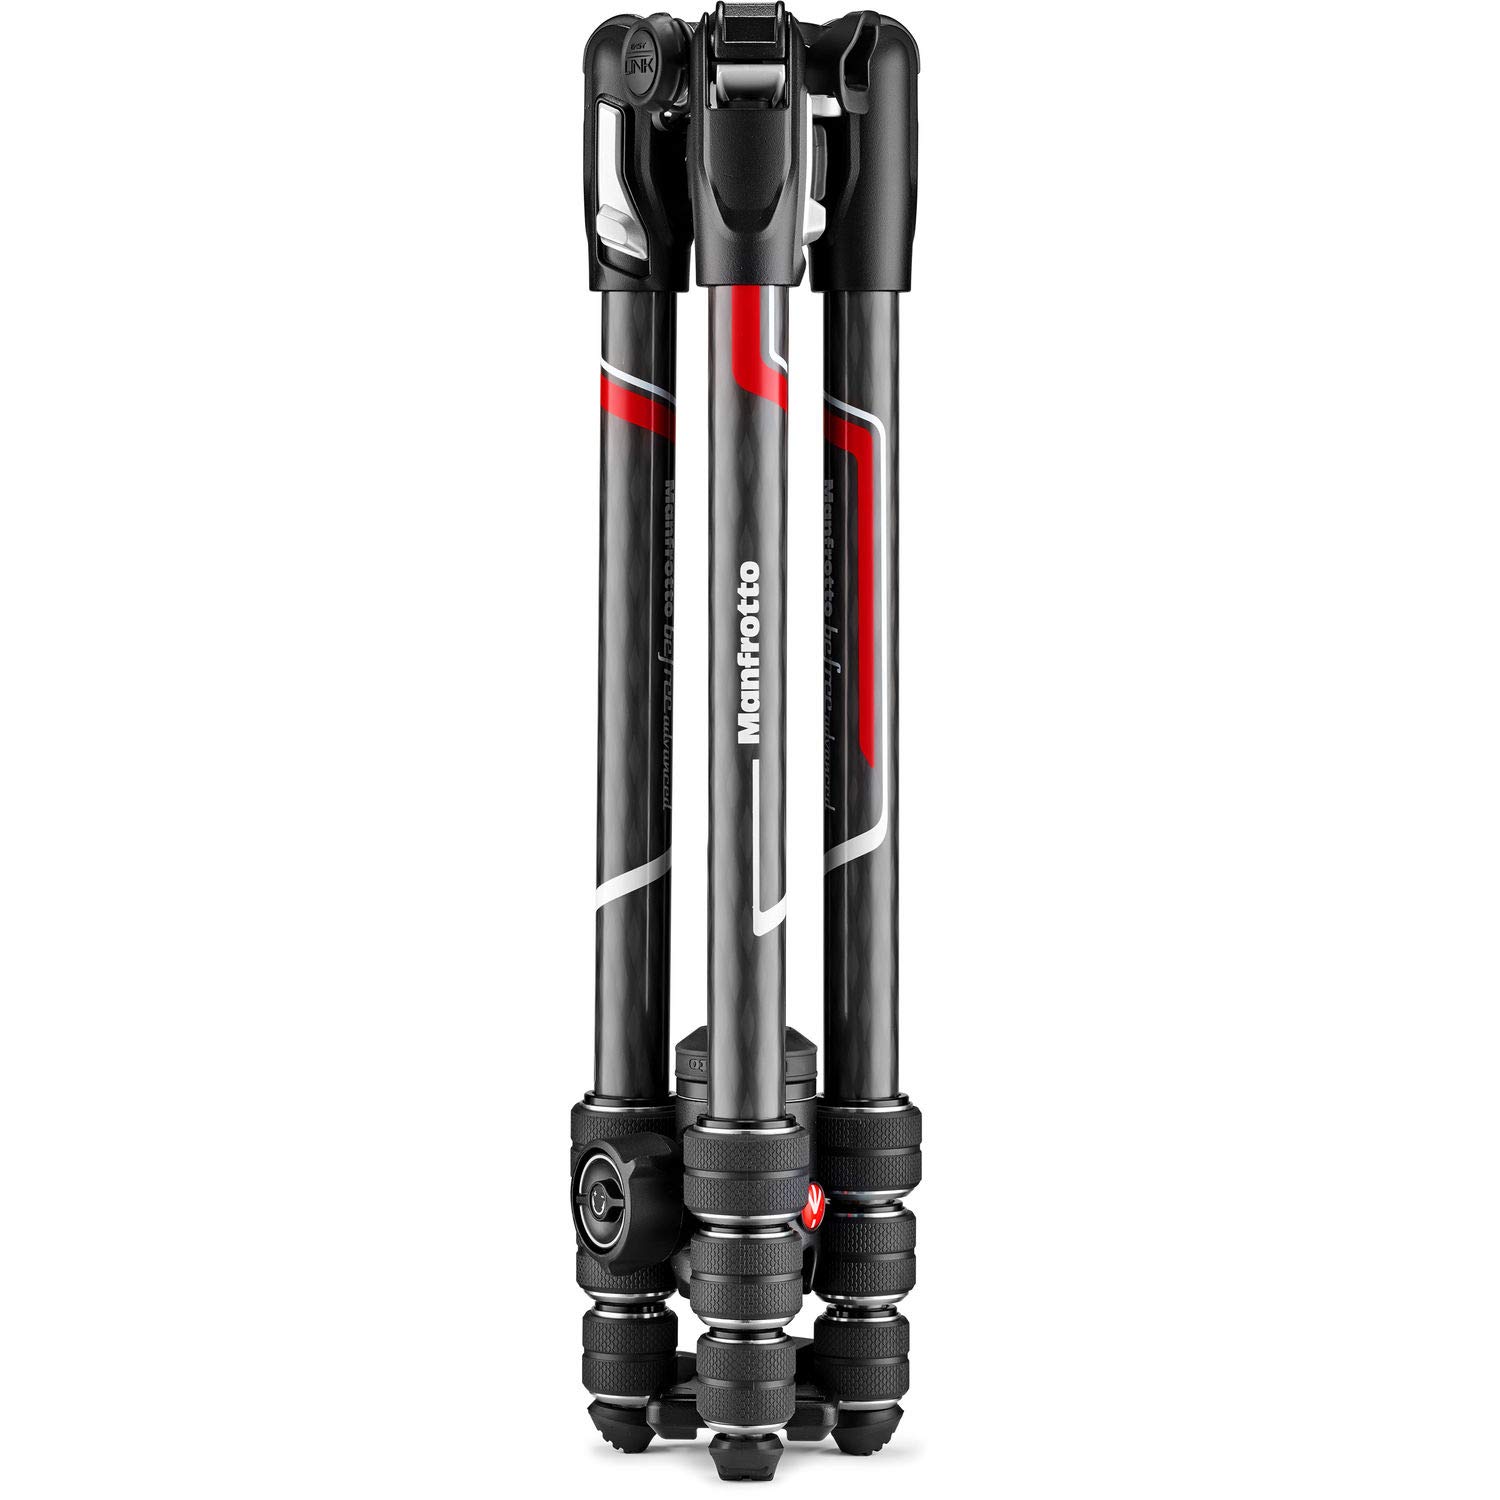 Manfrotto Befree Advanced Twist Camera Tripod Kit, Travel Tripod Kit with Fluid Head and Twist Closure, Portable and Compact,…